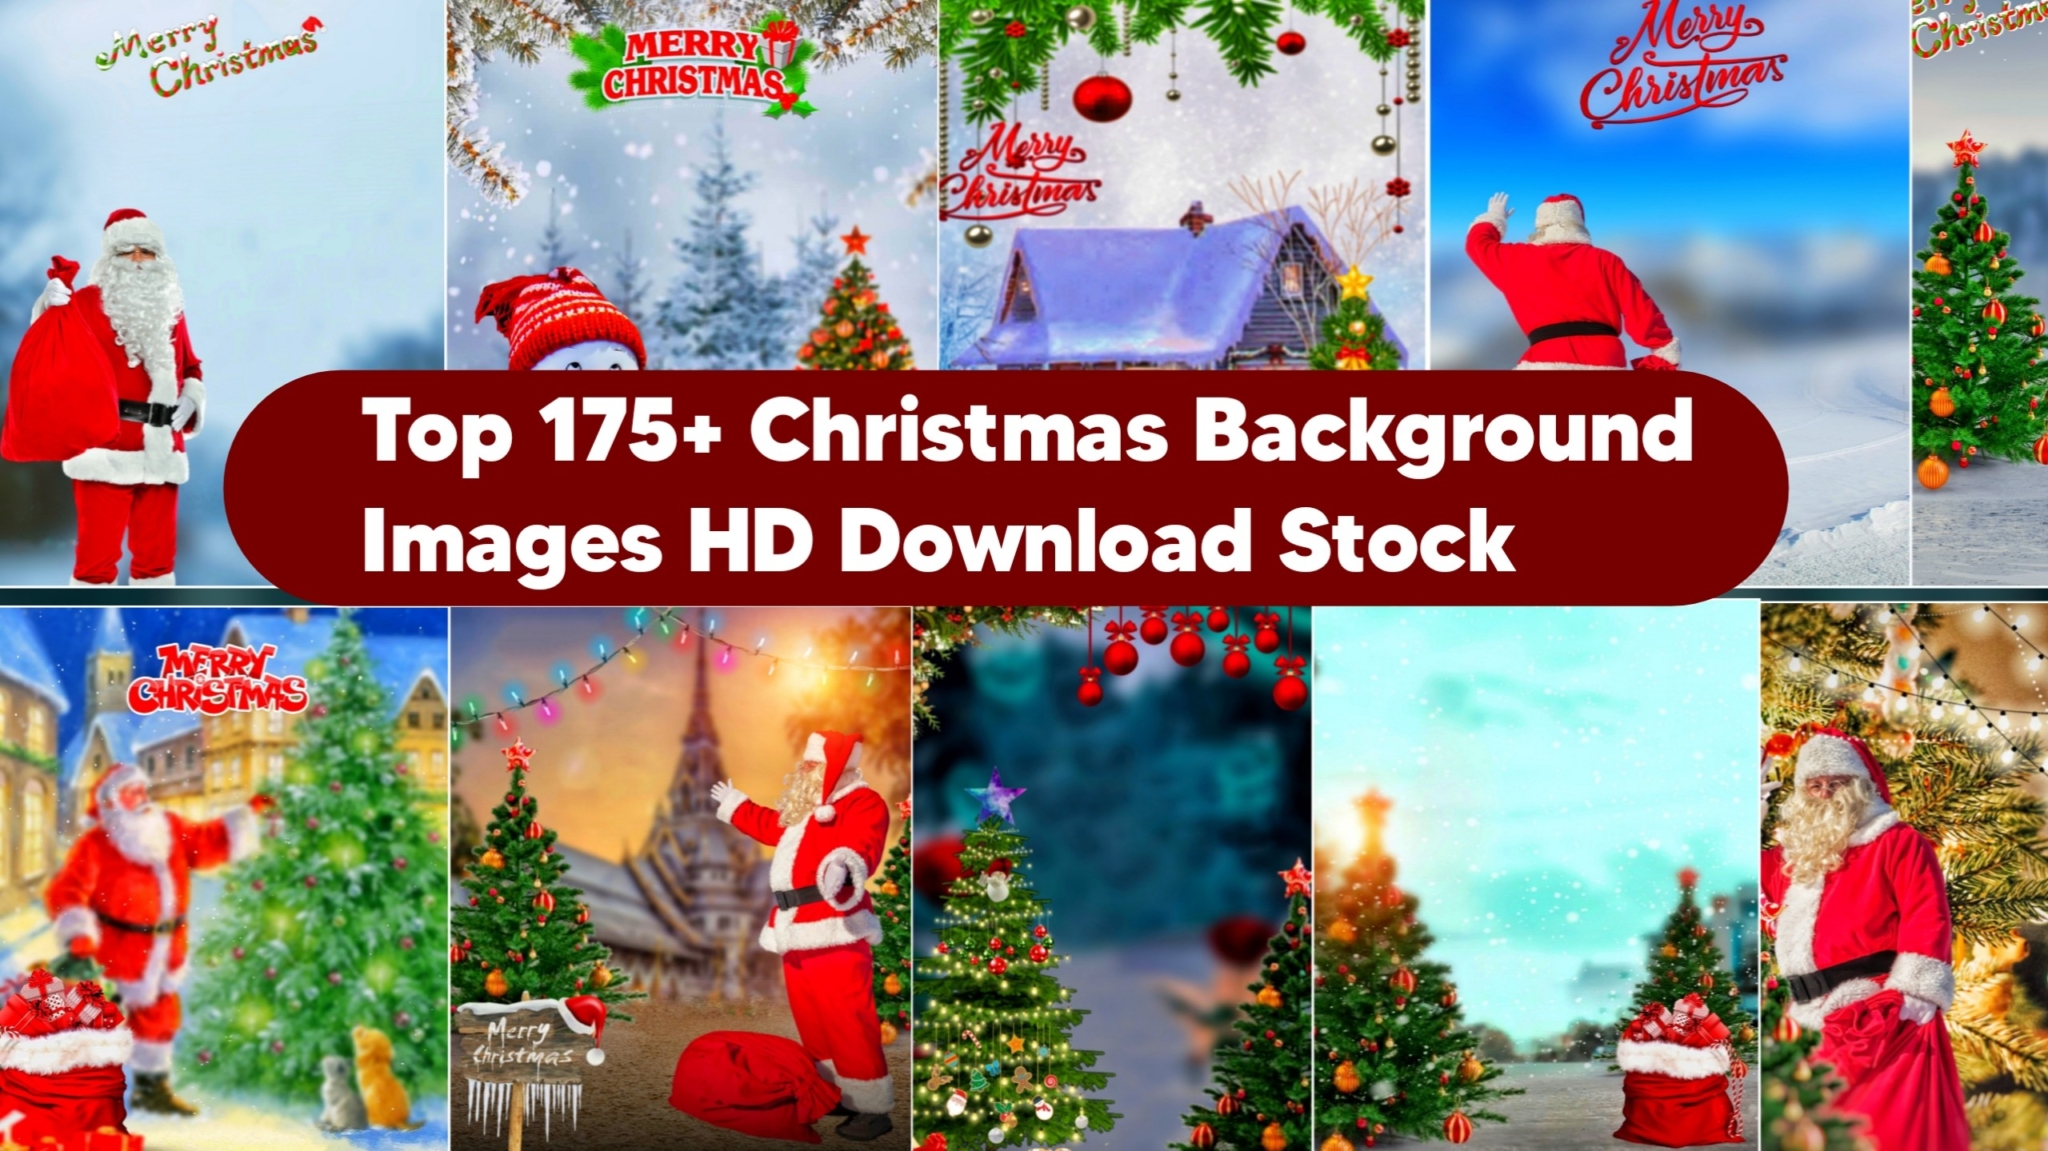 Top 175+ Christmas Background Images HD Download Stock